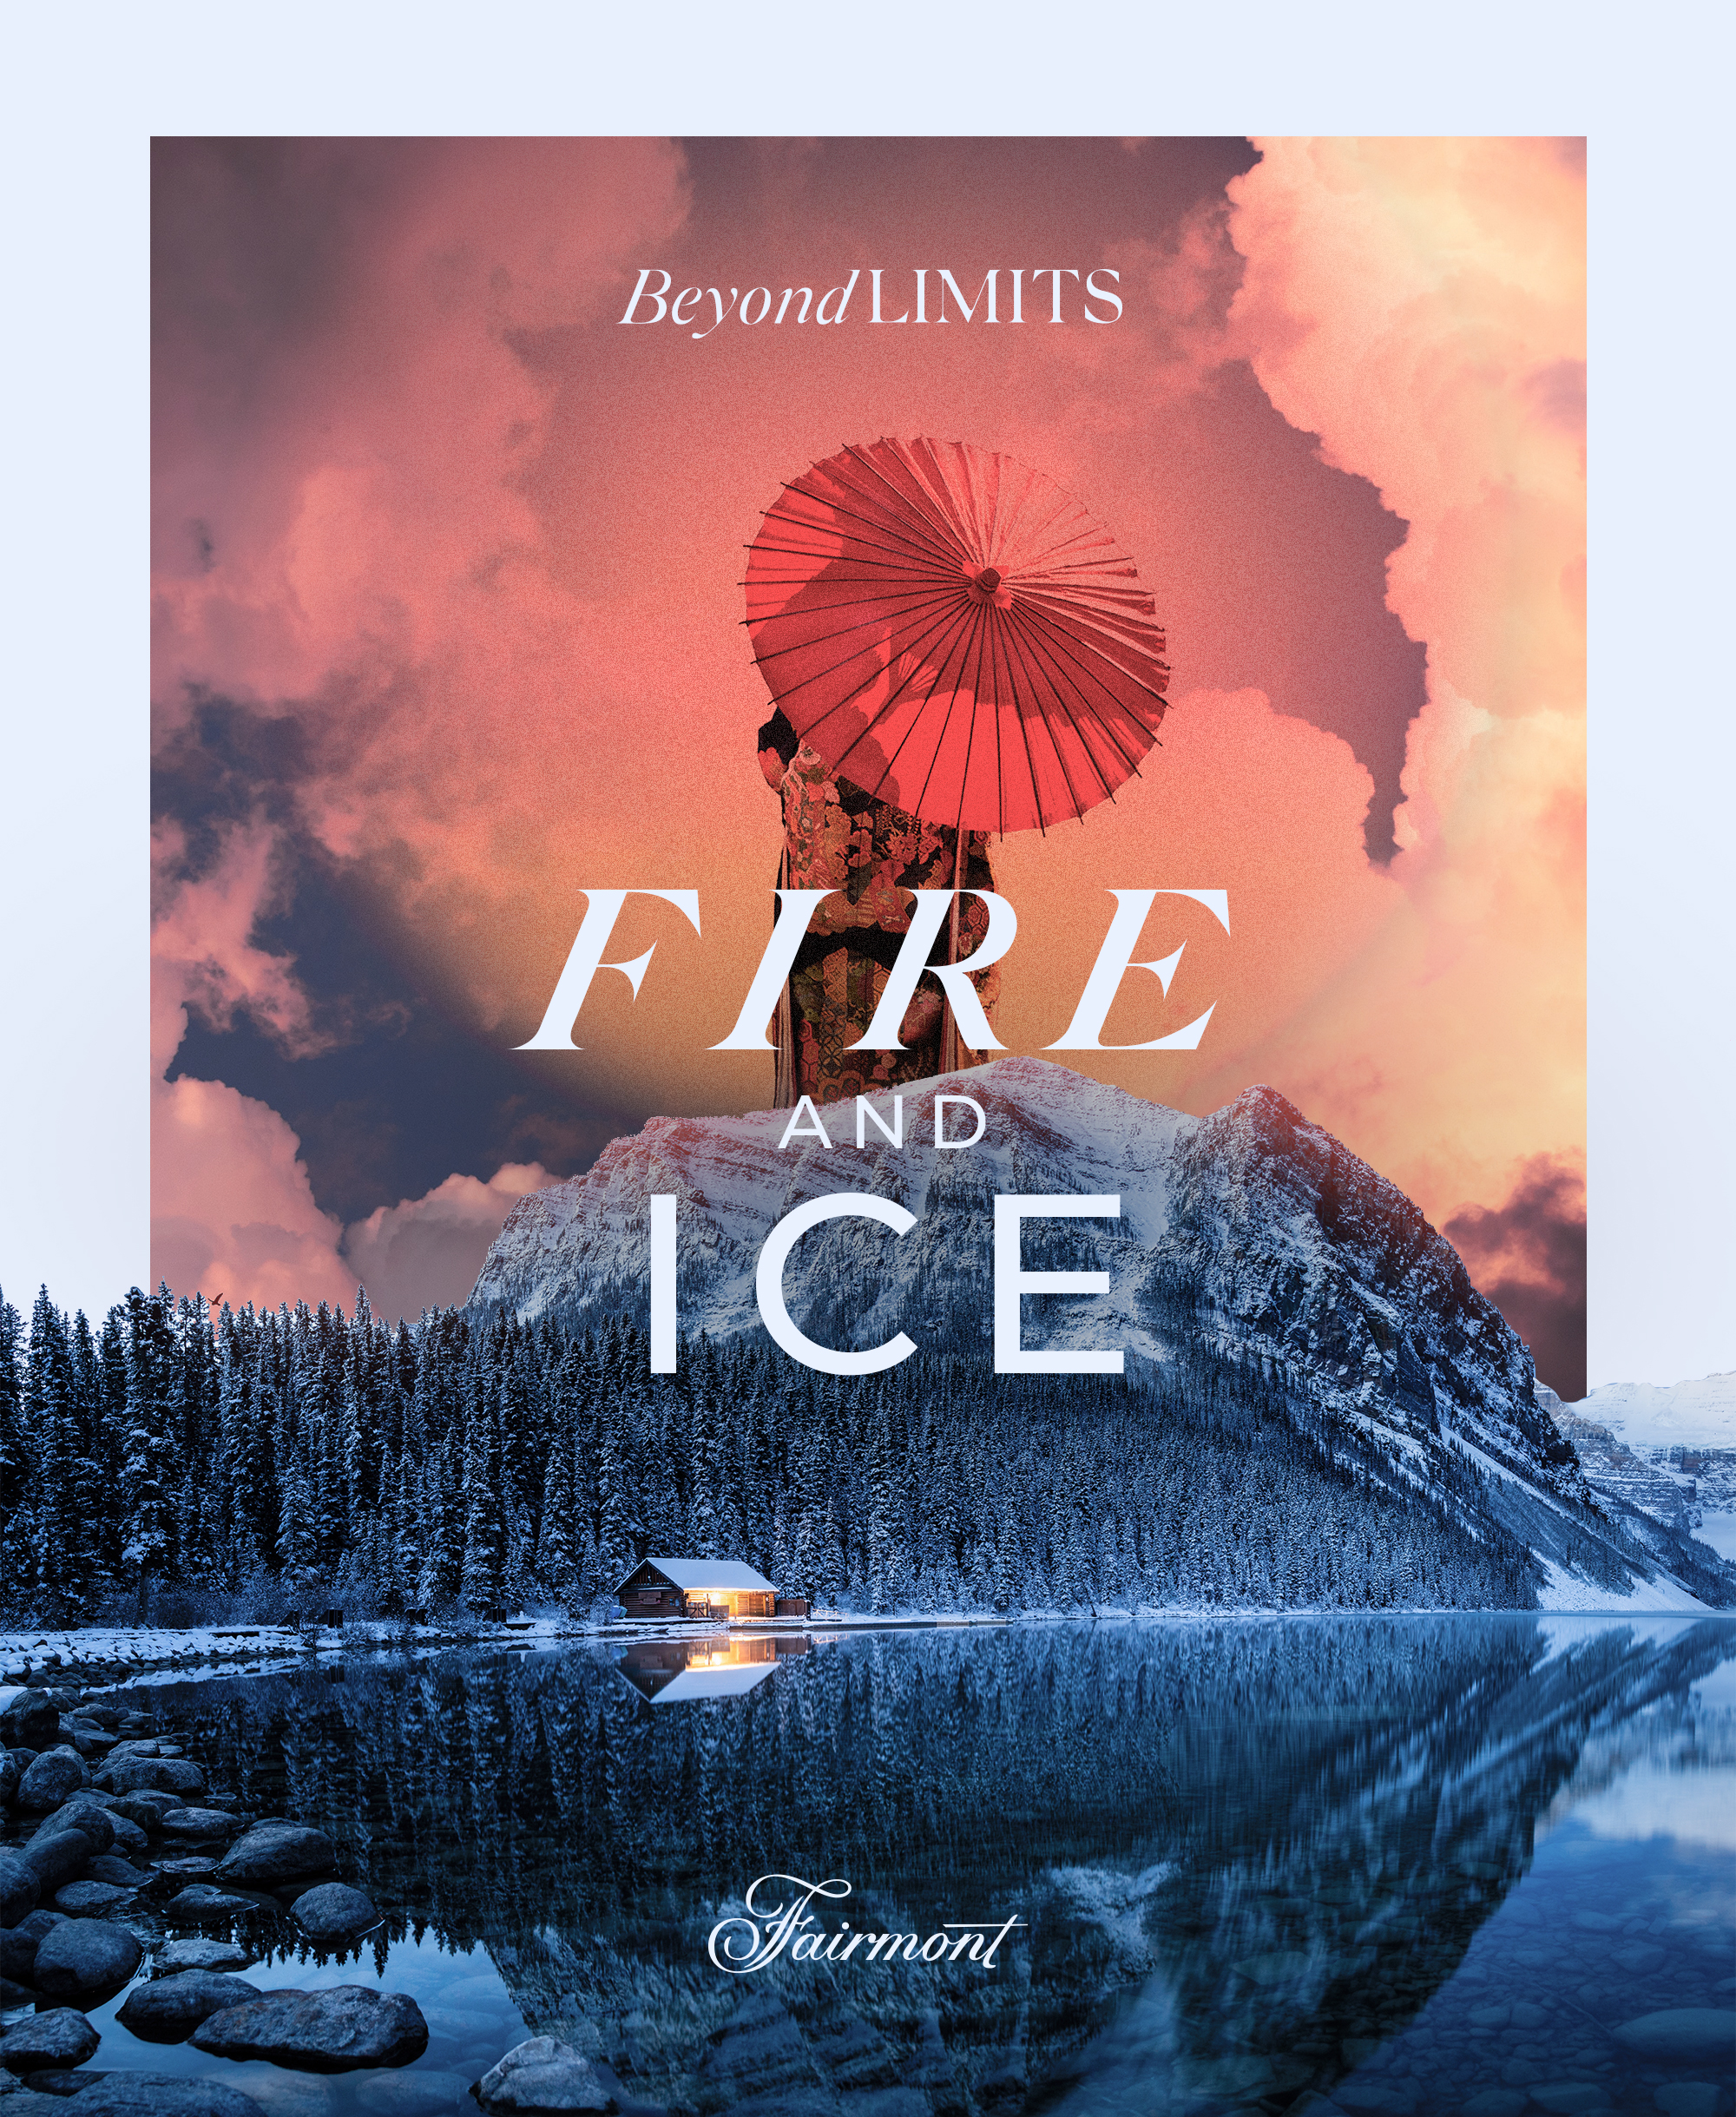 Fairmont Chateau Lake Louise melds ‘Fire & Ice’ for one-of-a-kind culinary experience